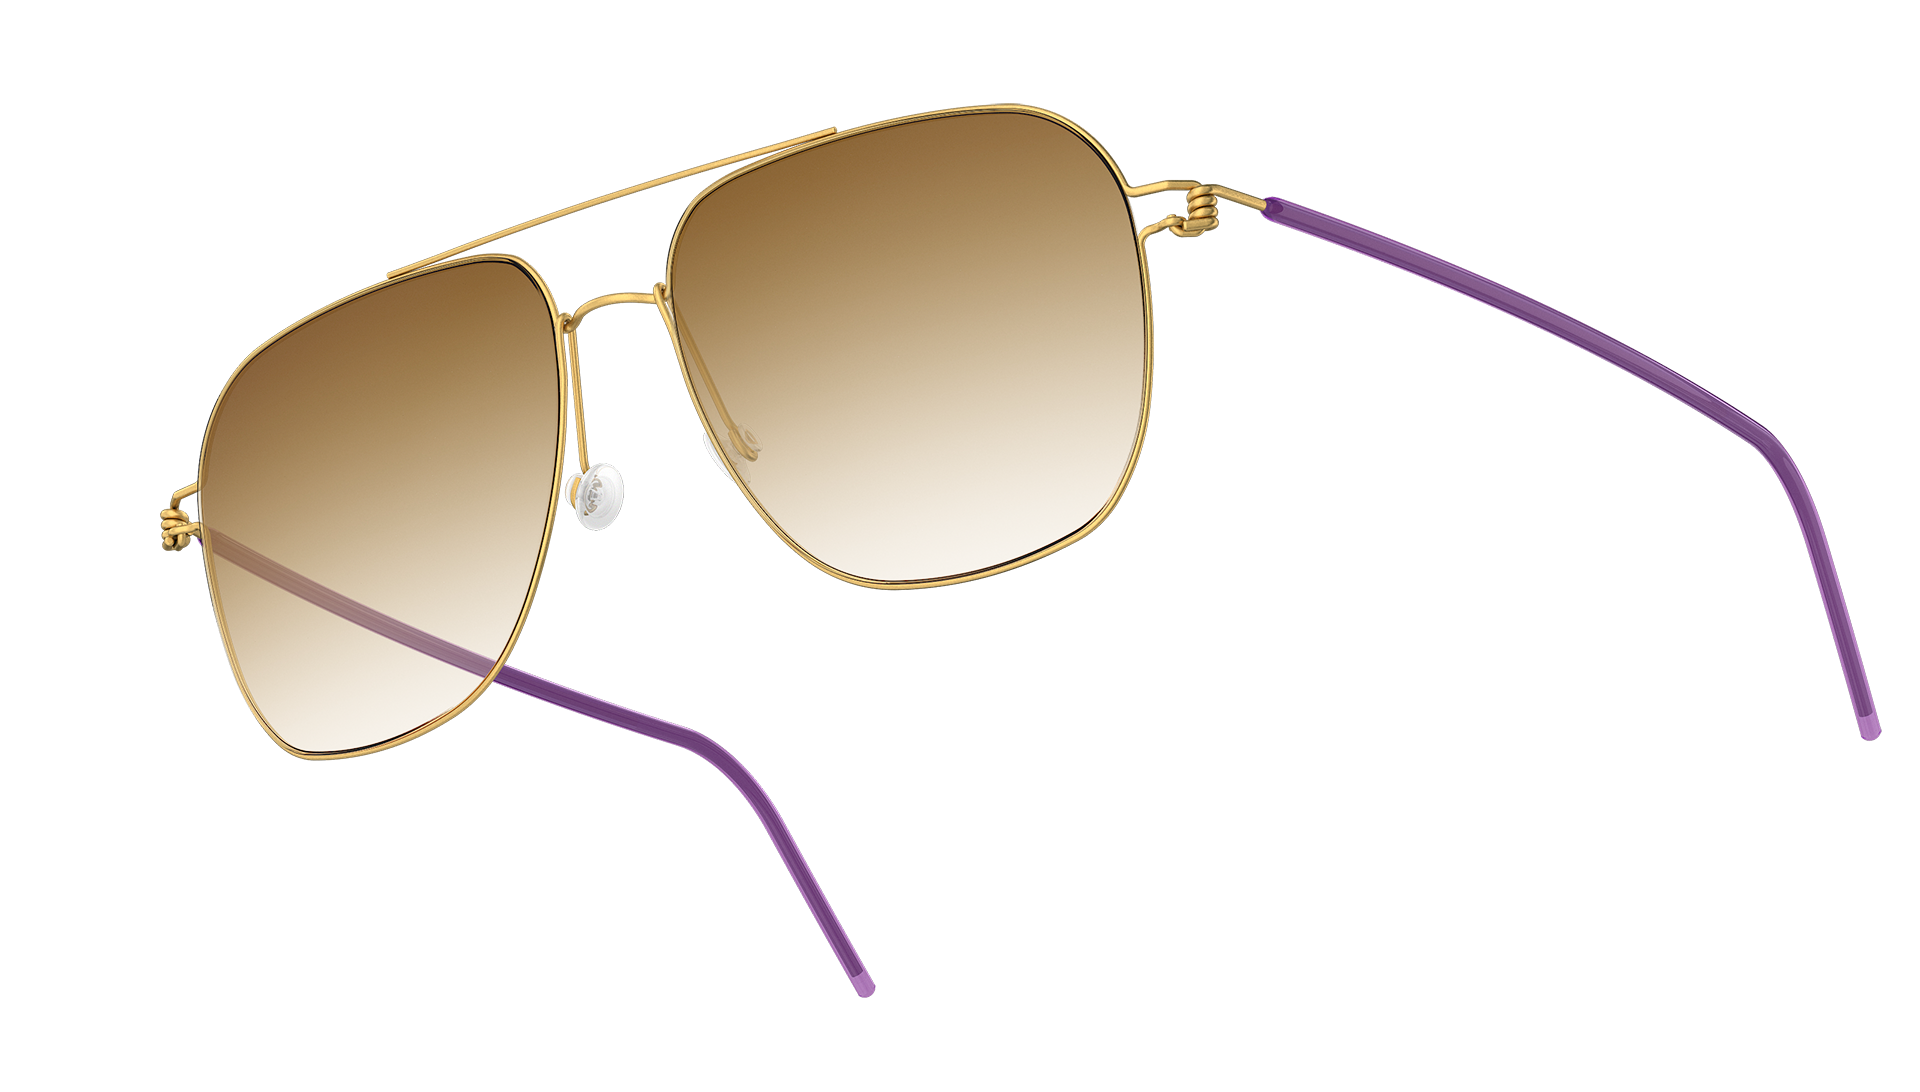 LINDBERG sun titanium Model 8210 PGT rounded aviator in gold tone with purple temple covers